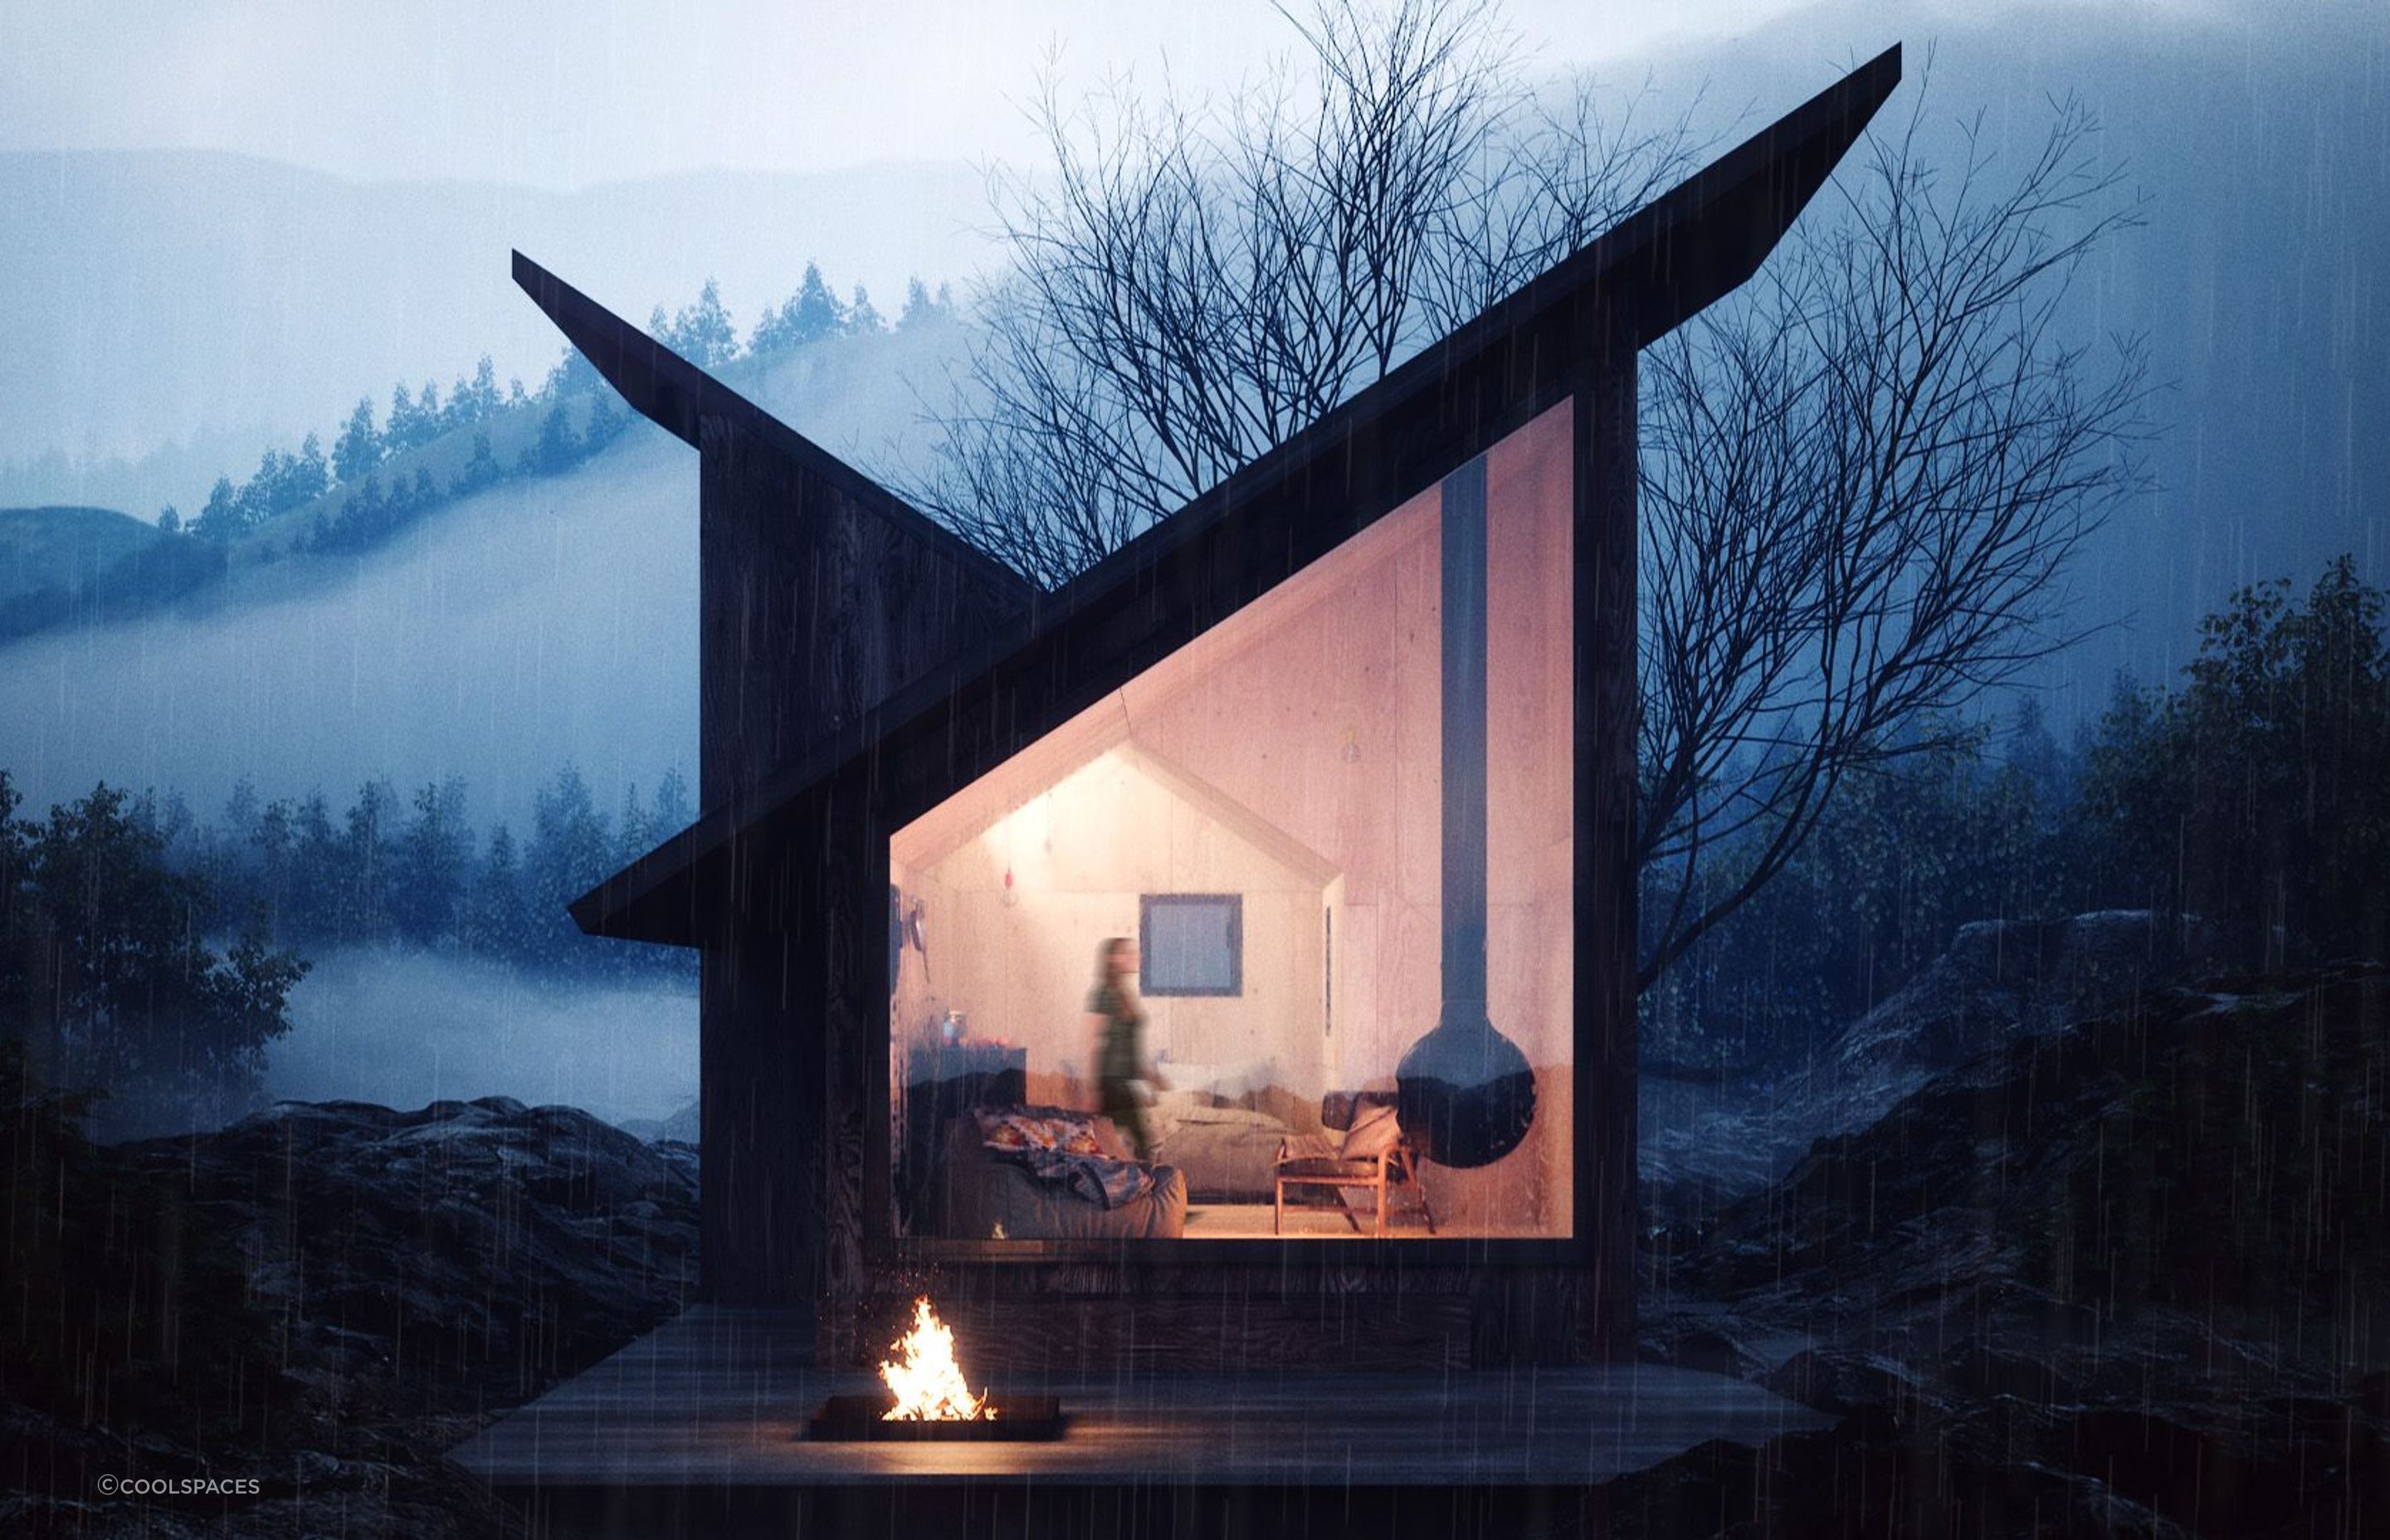 Tiny home costs vary widely depending on design, materials, furnishings and more and inspiring examples like the Mountain Refuge tiny house by CoolSpaces shows what's possible when working with the very best